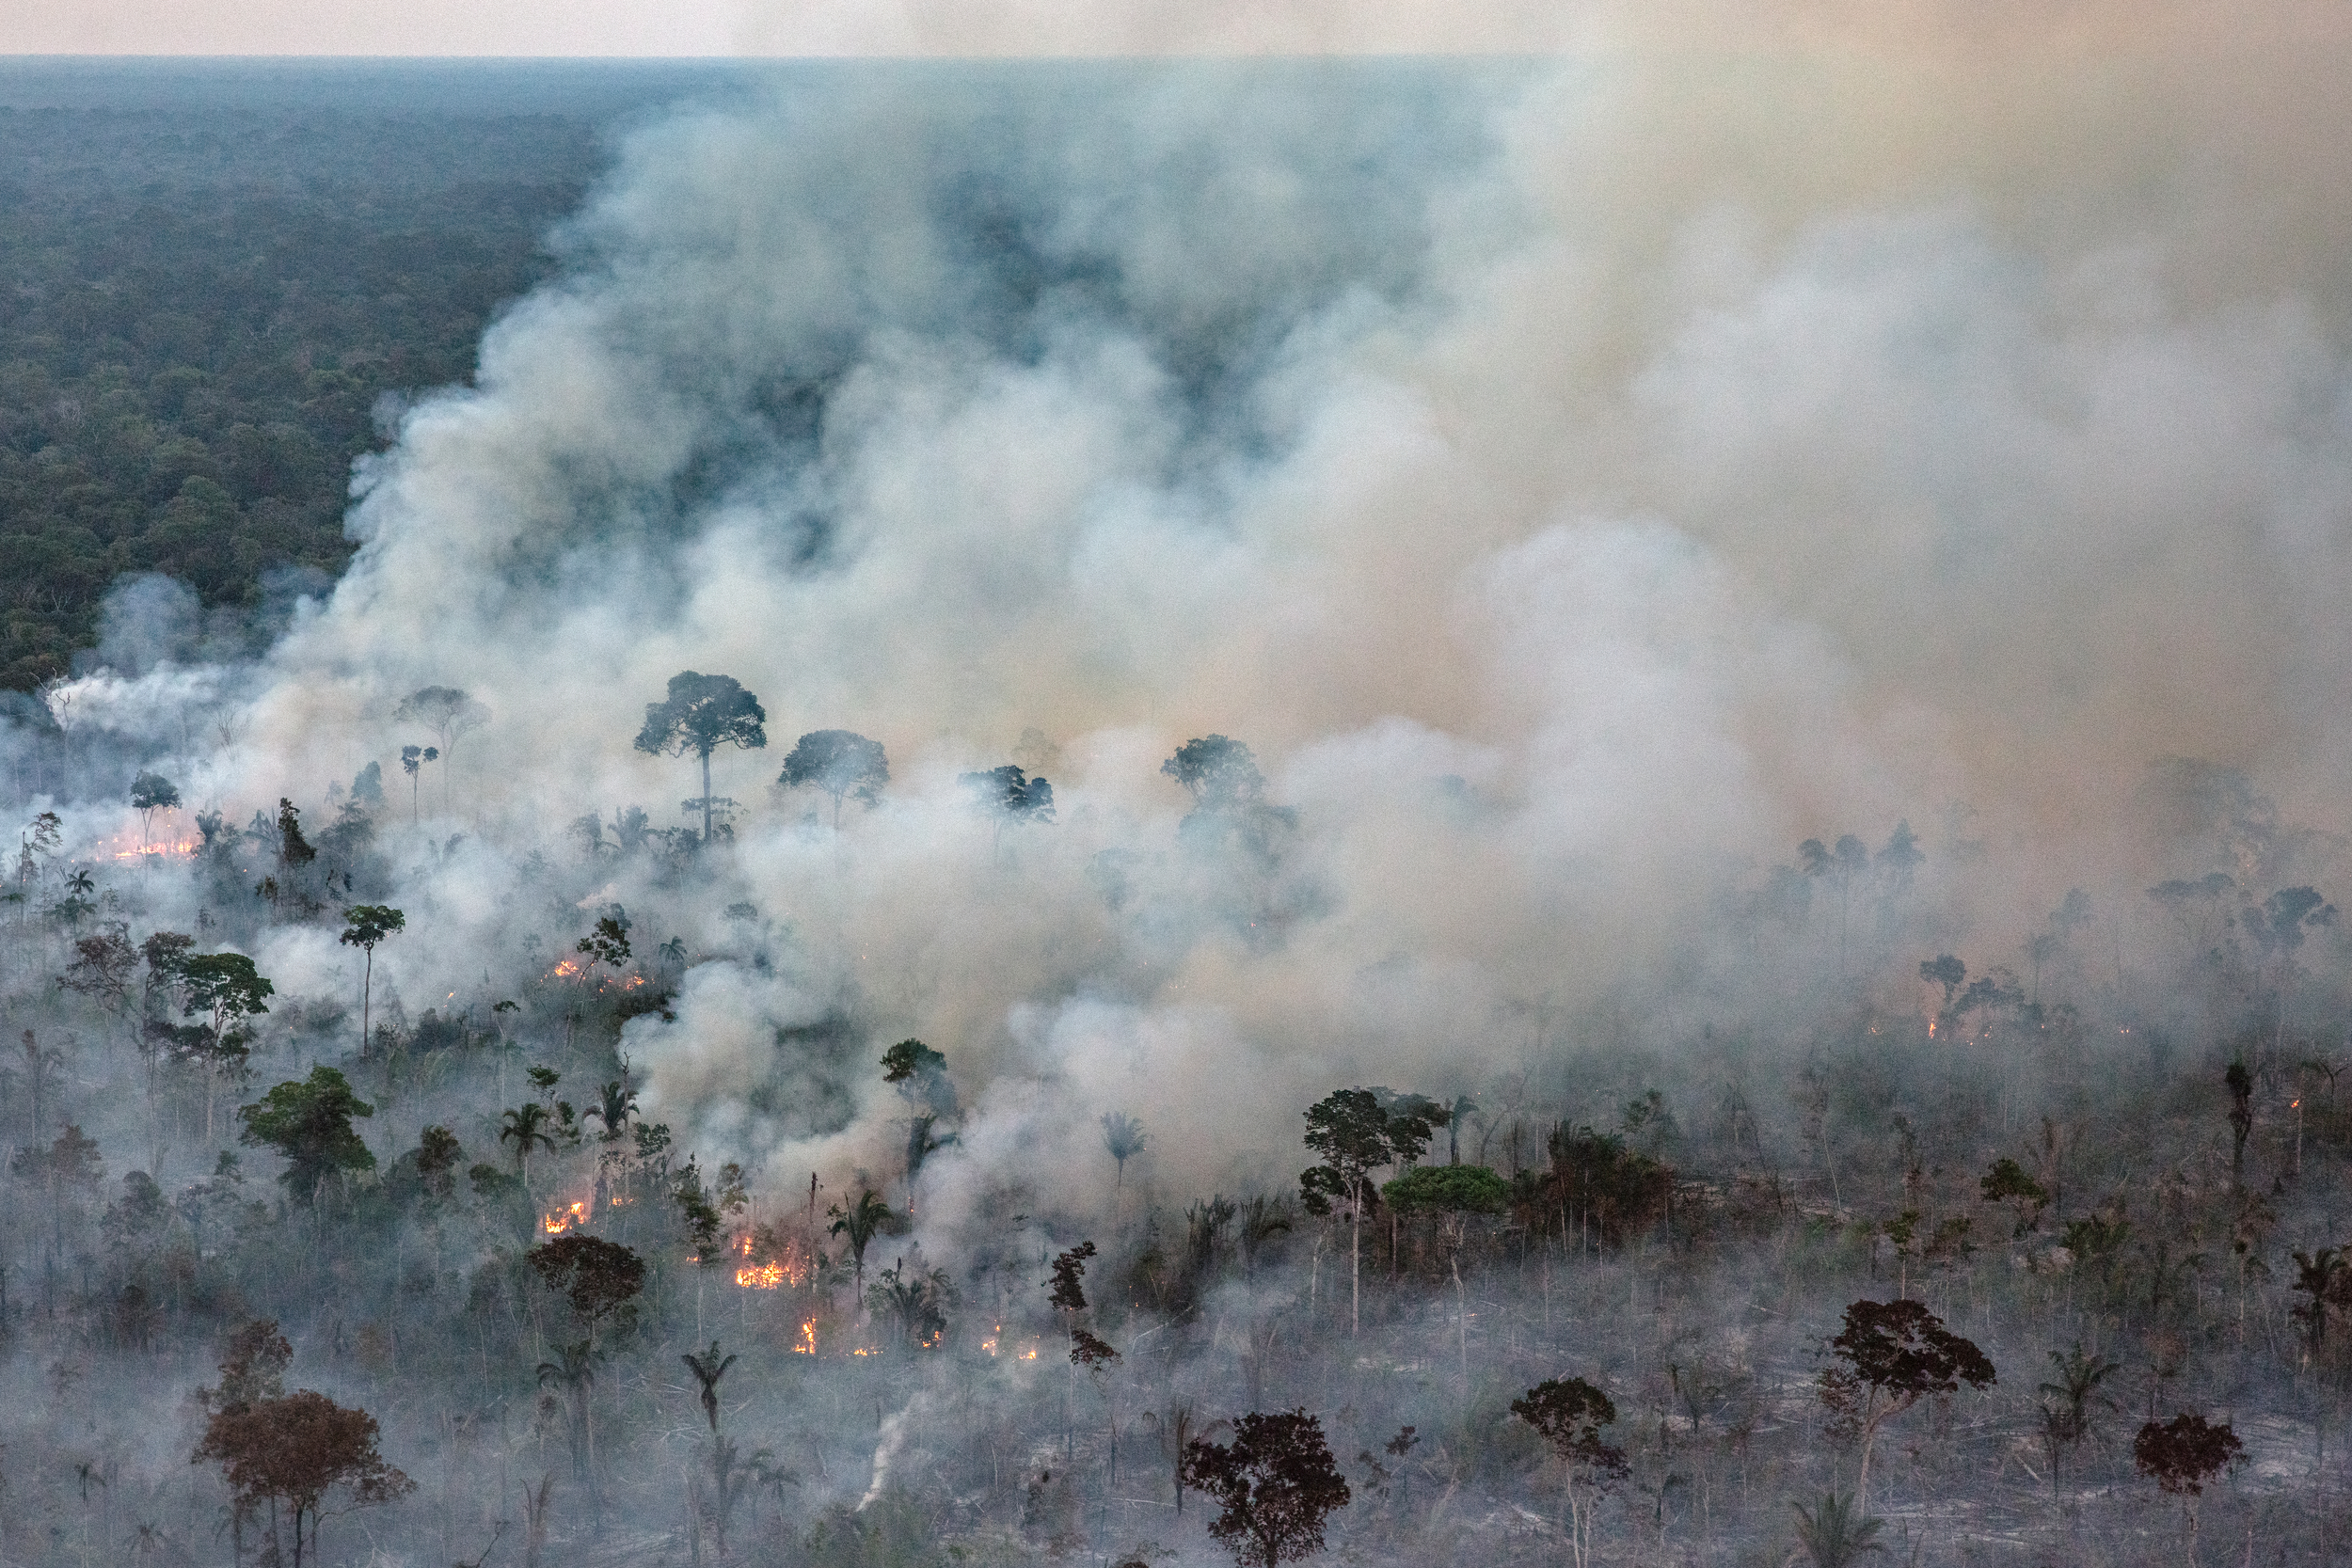 Fire in a recently deforested area in Gleba Abelhas, an unprotected federal forest in Canutama, Amazonas state. © Marizilda Cruppe / Greenpeace